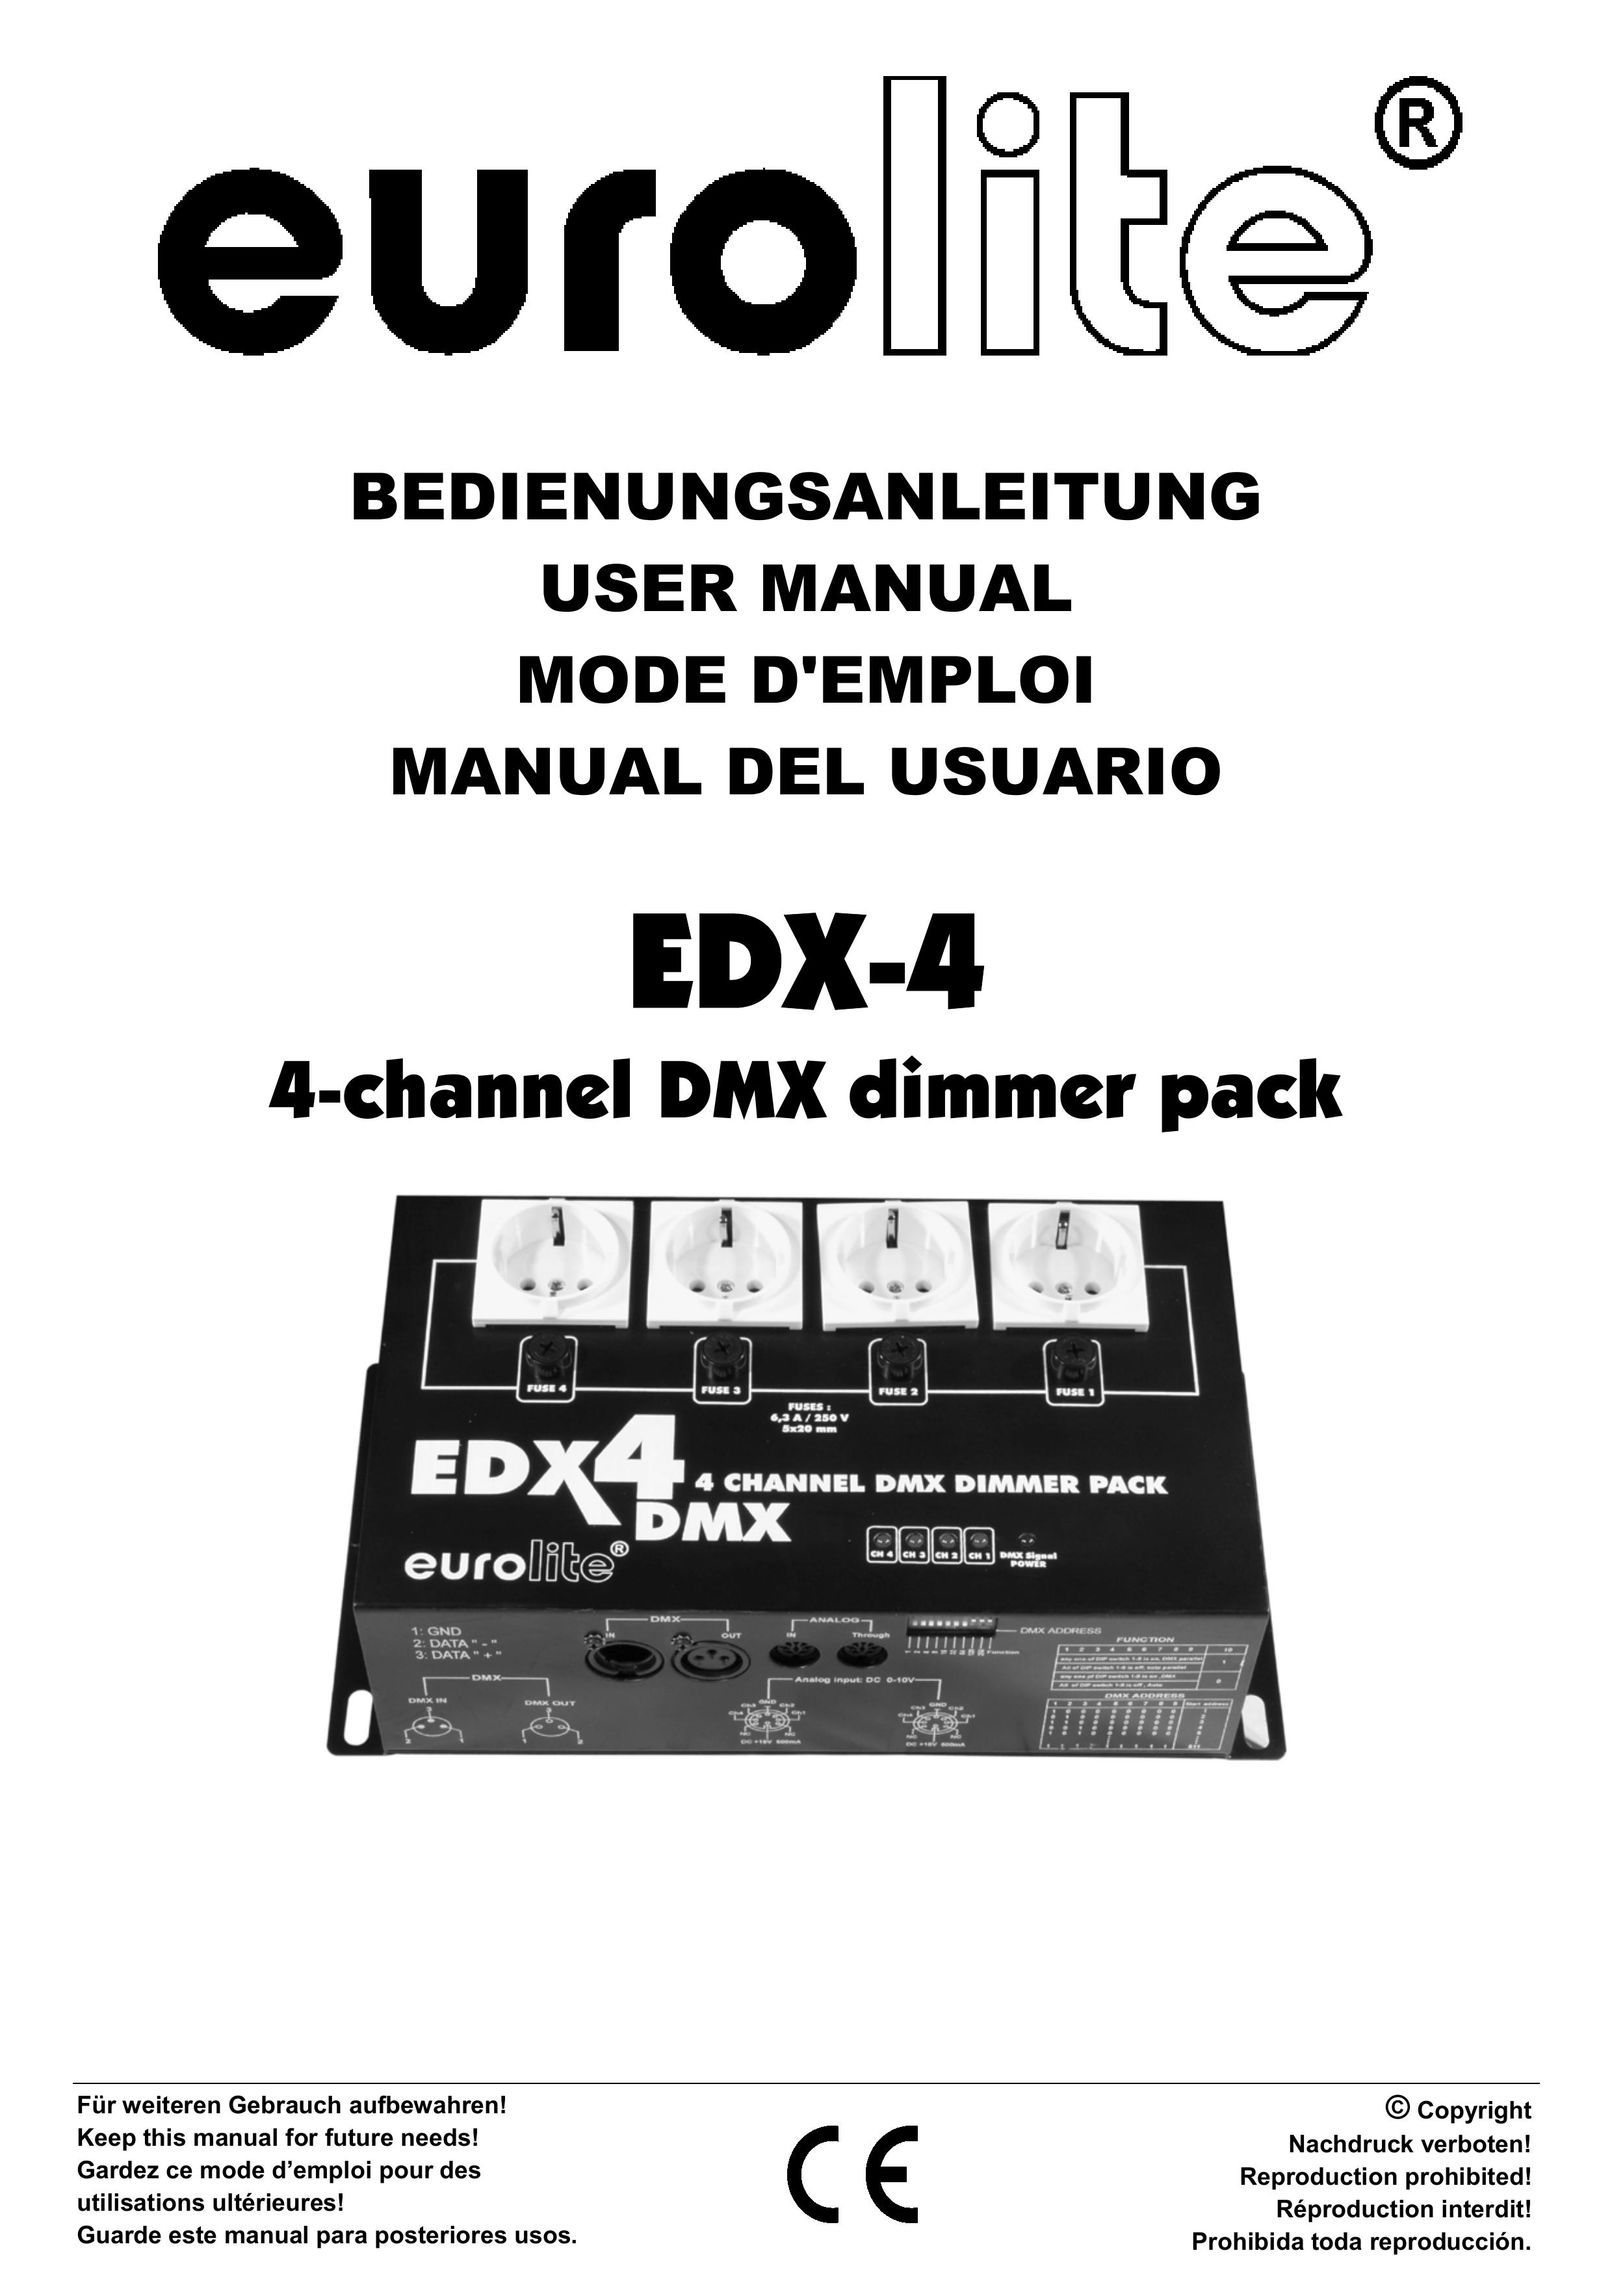 EuroLite Cases 4-channel DMX dimmer pack Switch User Manual